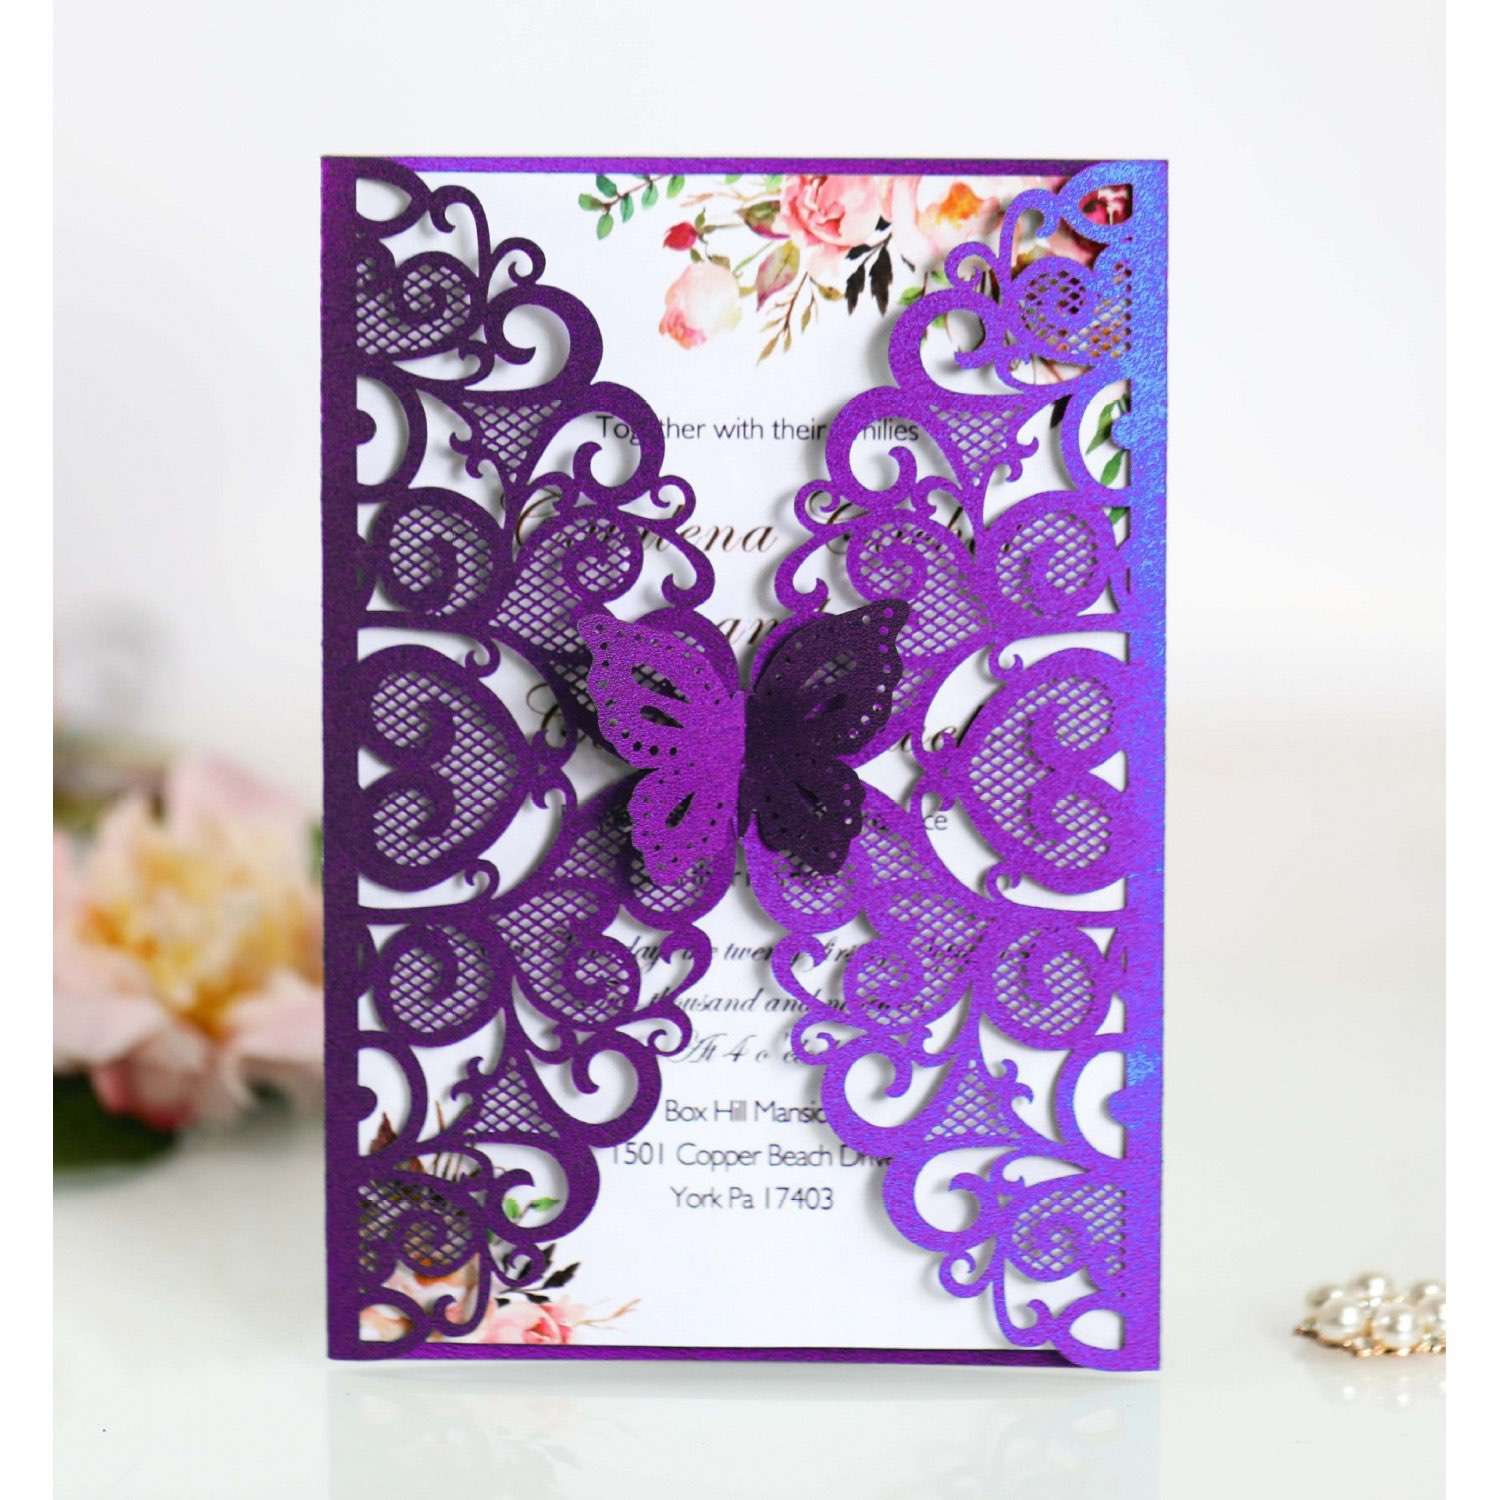 Butterfly Invitation Card Valentine's Day Greeting Card Marriage Invitation Card Laser Cut